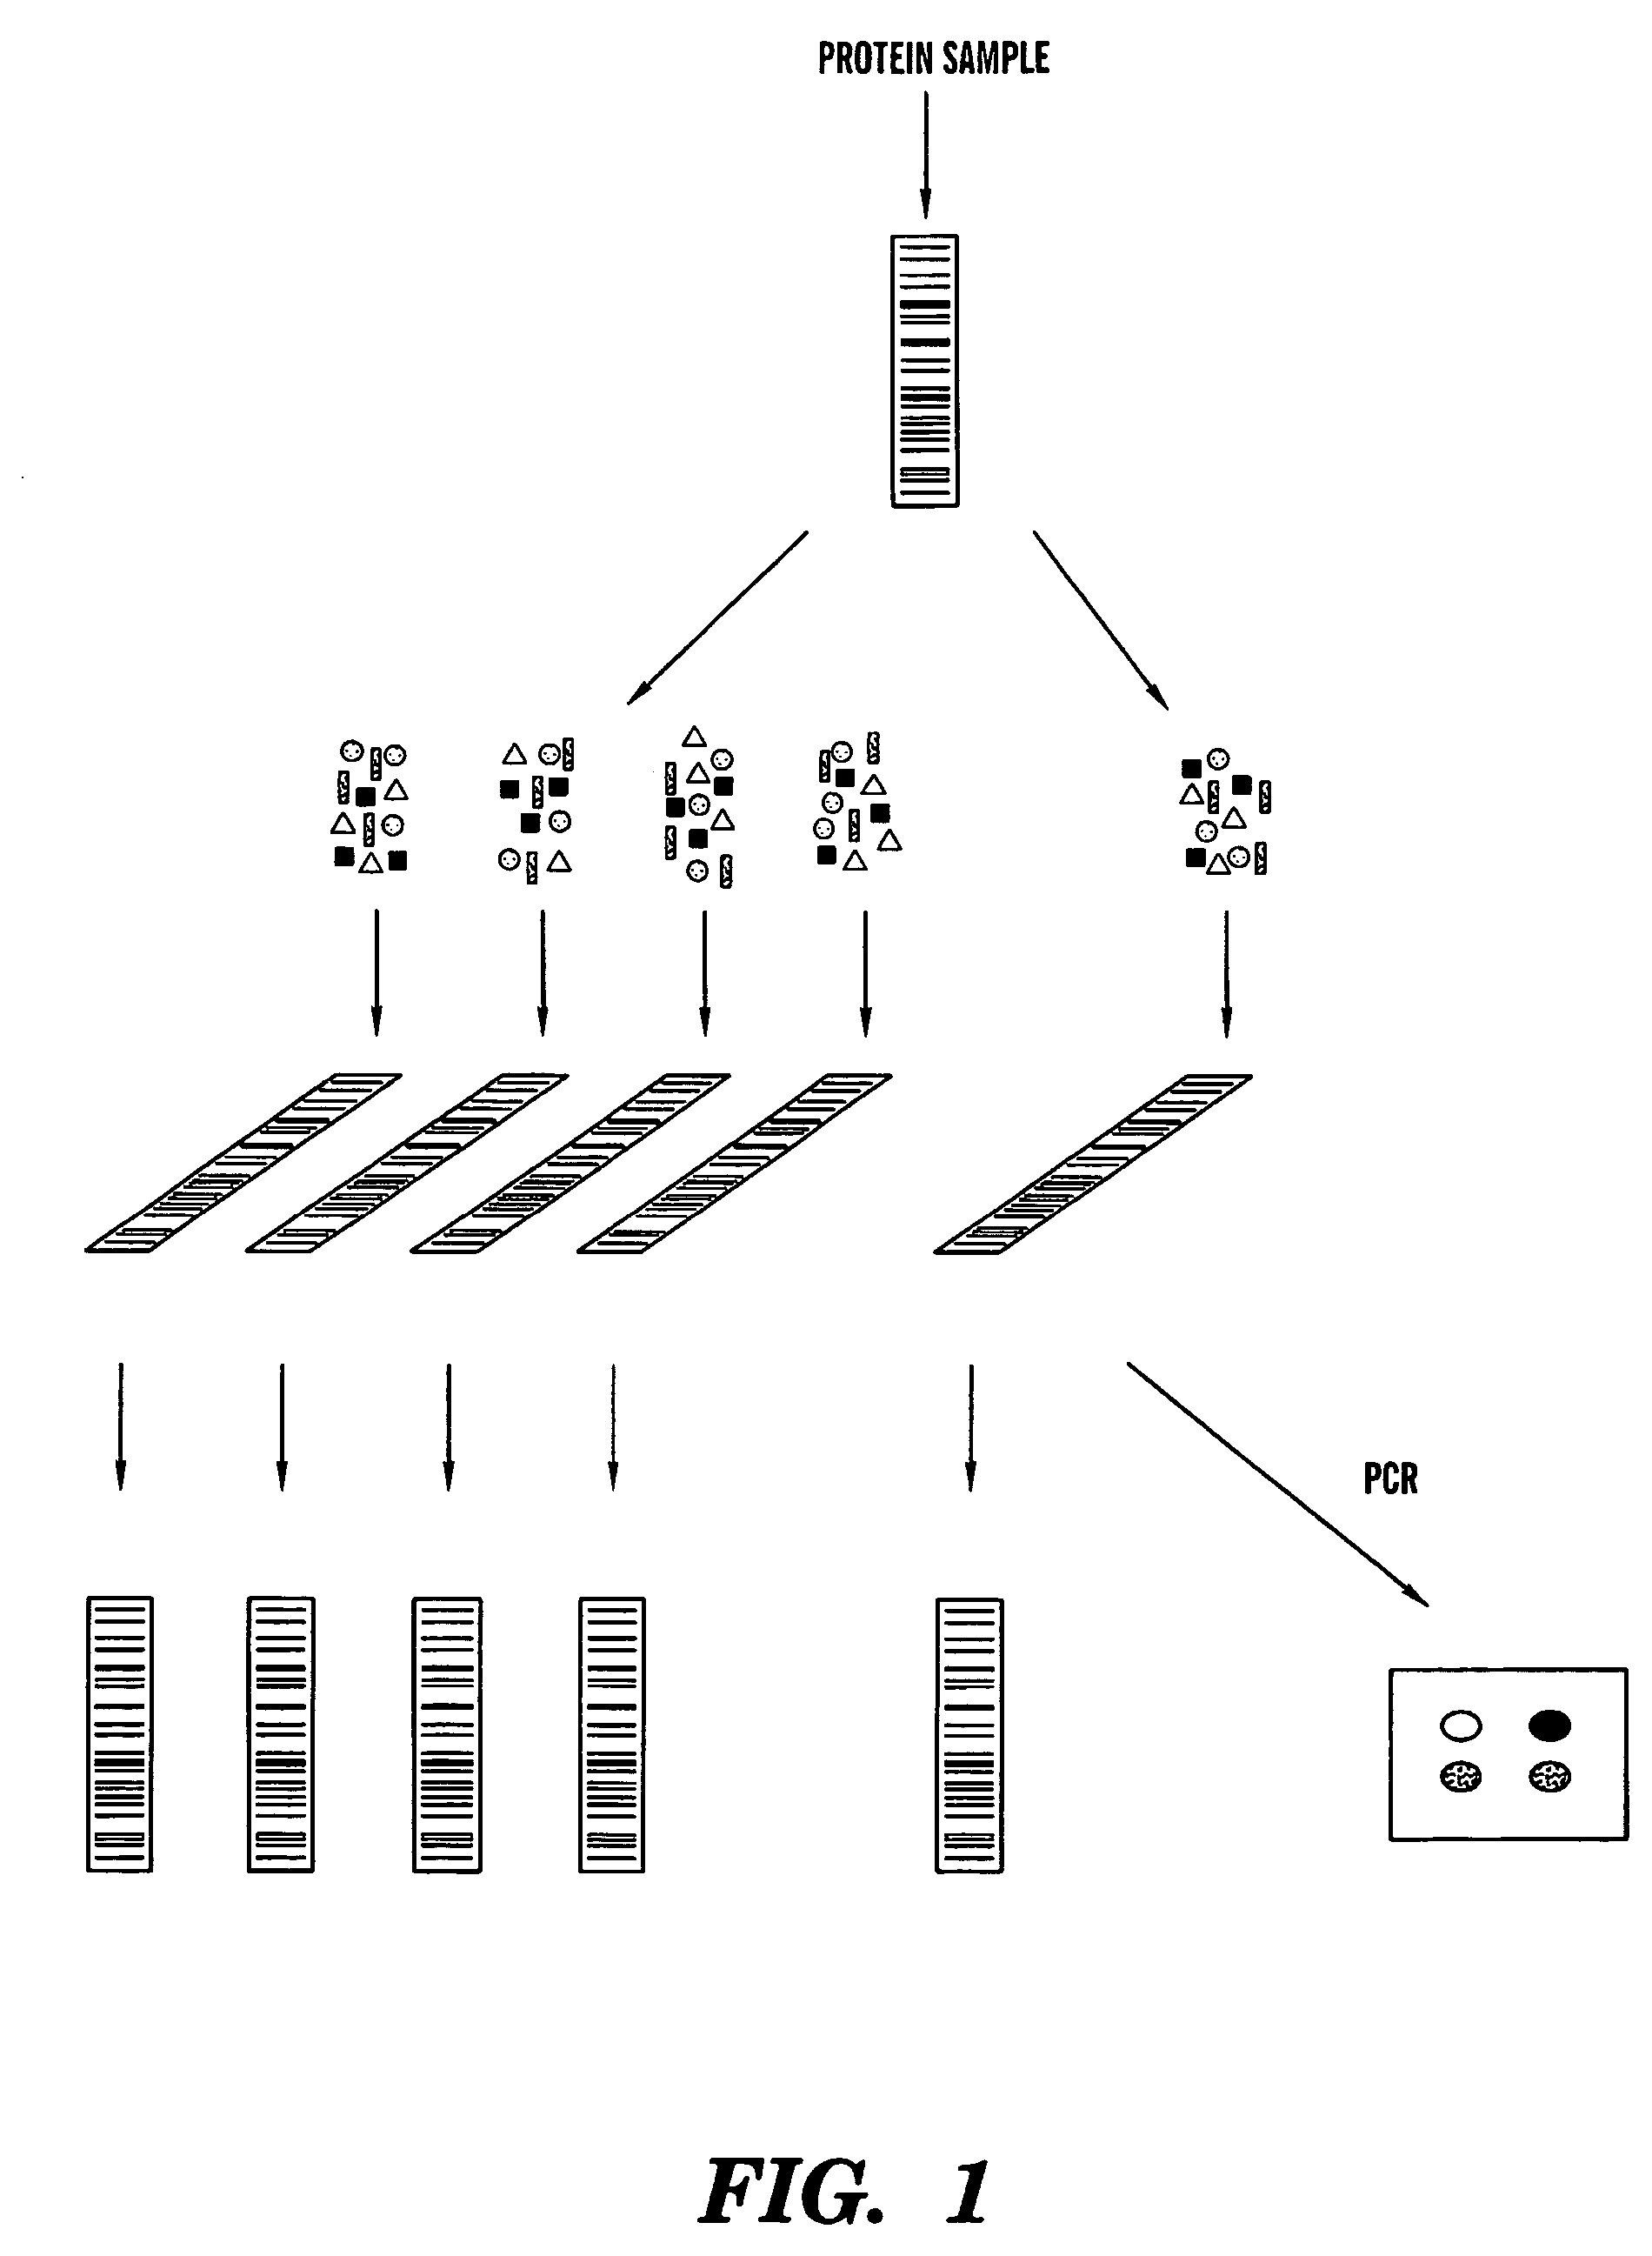 Methods of analysis and labeling of protein-protein interactions